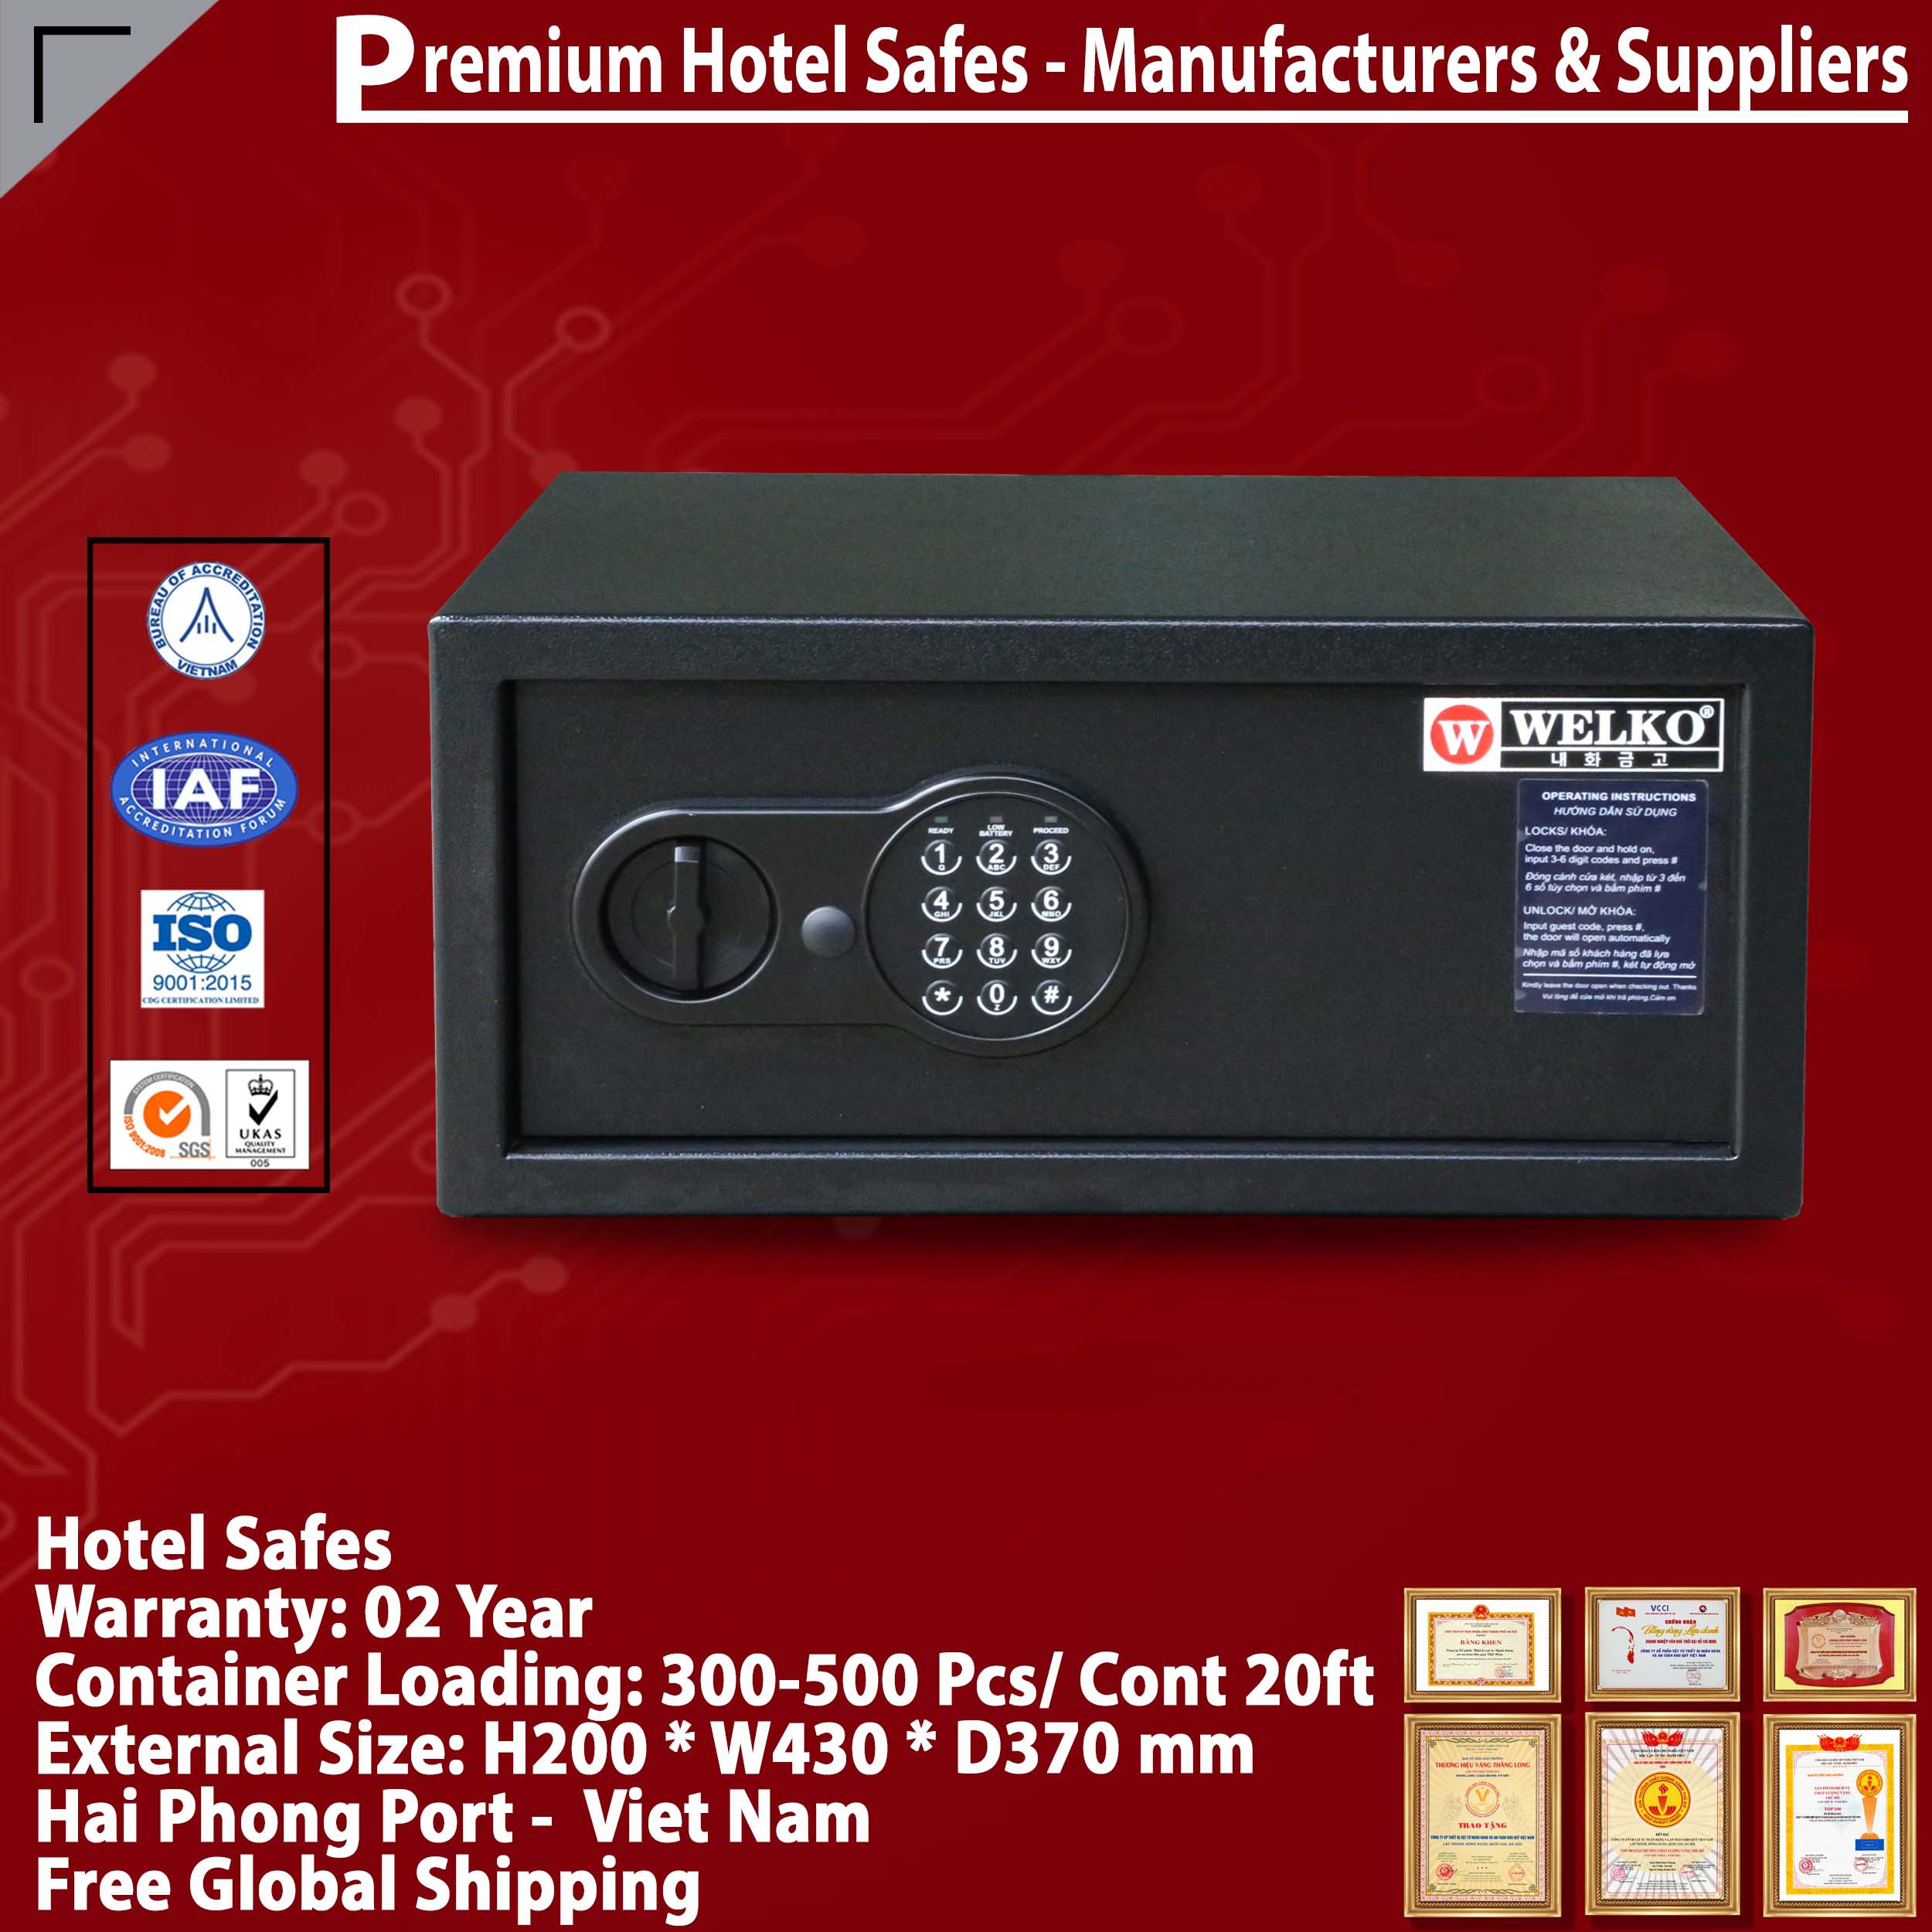 Hotel Room Security Factory Direct & Fast Shipping‎